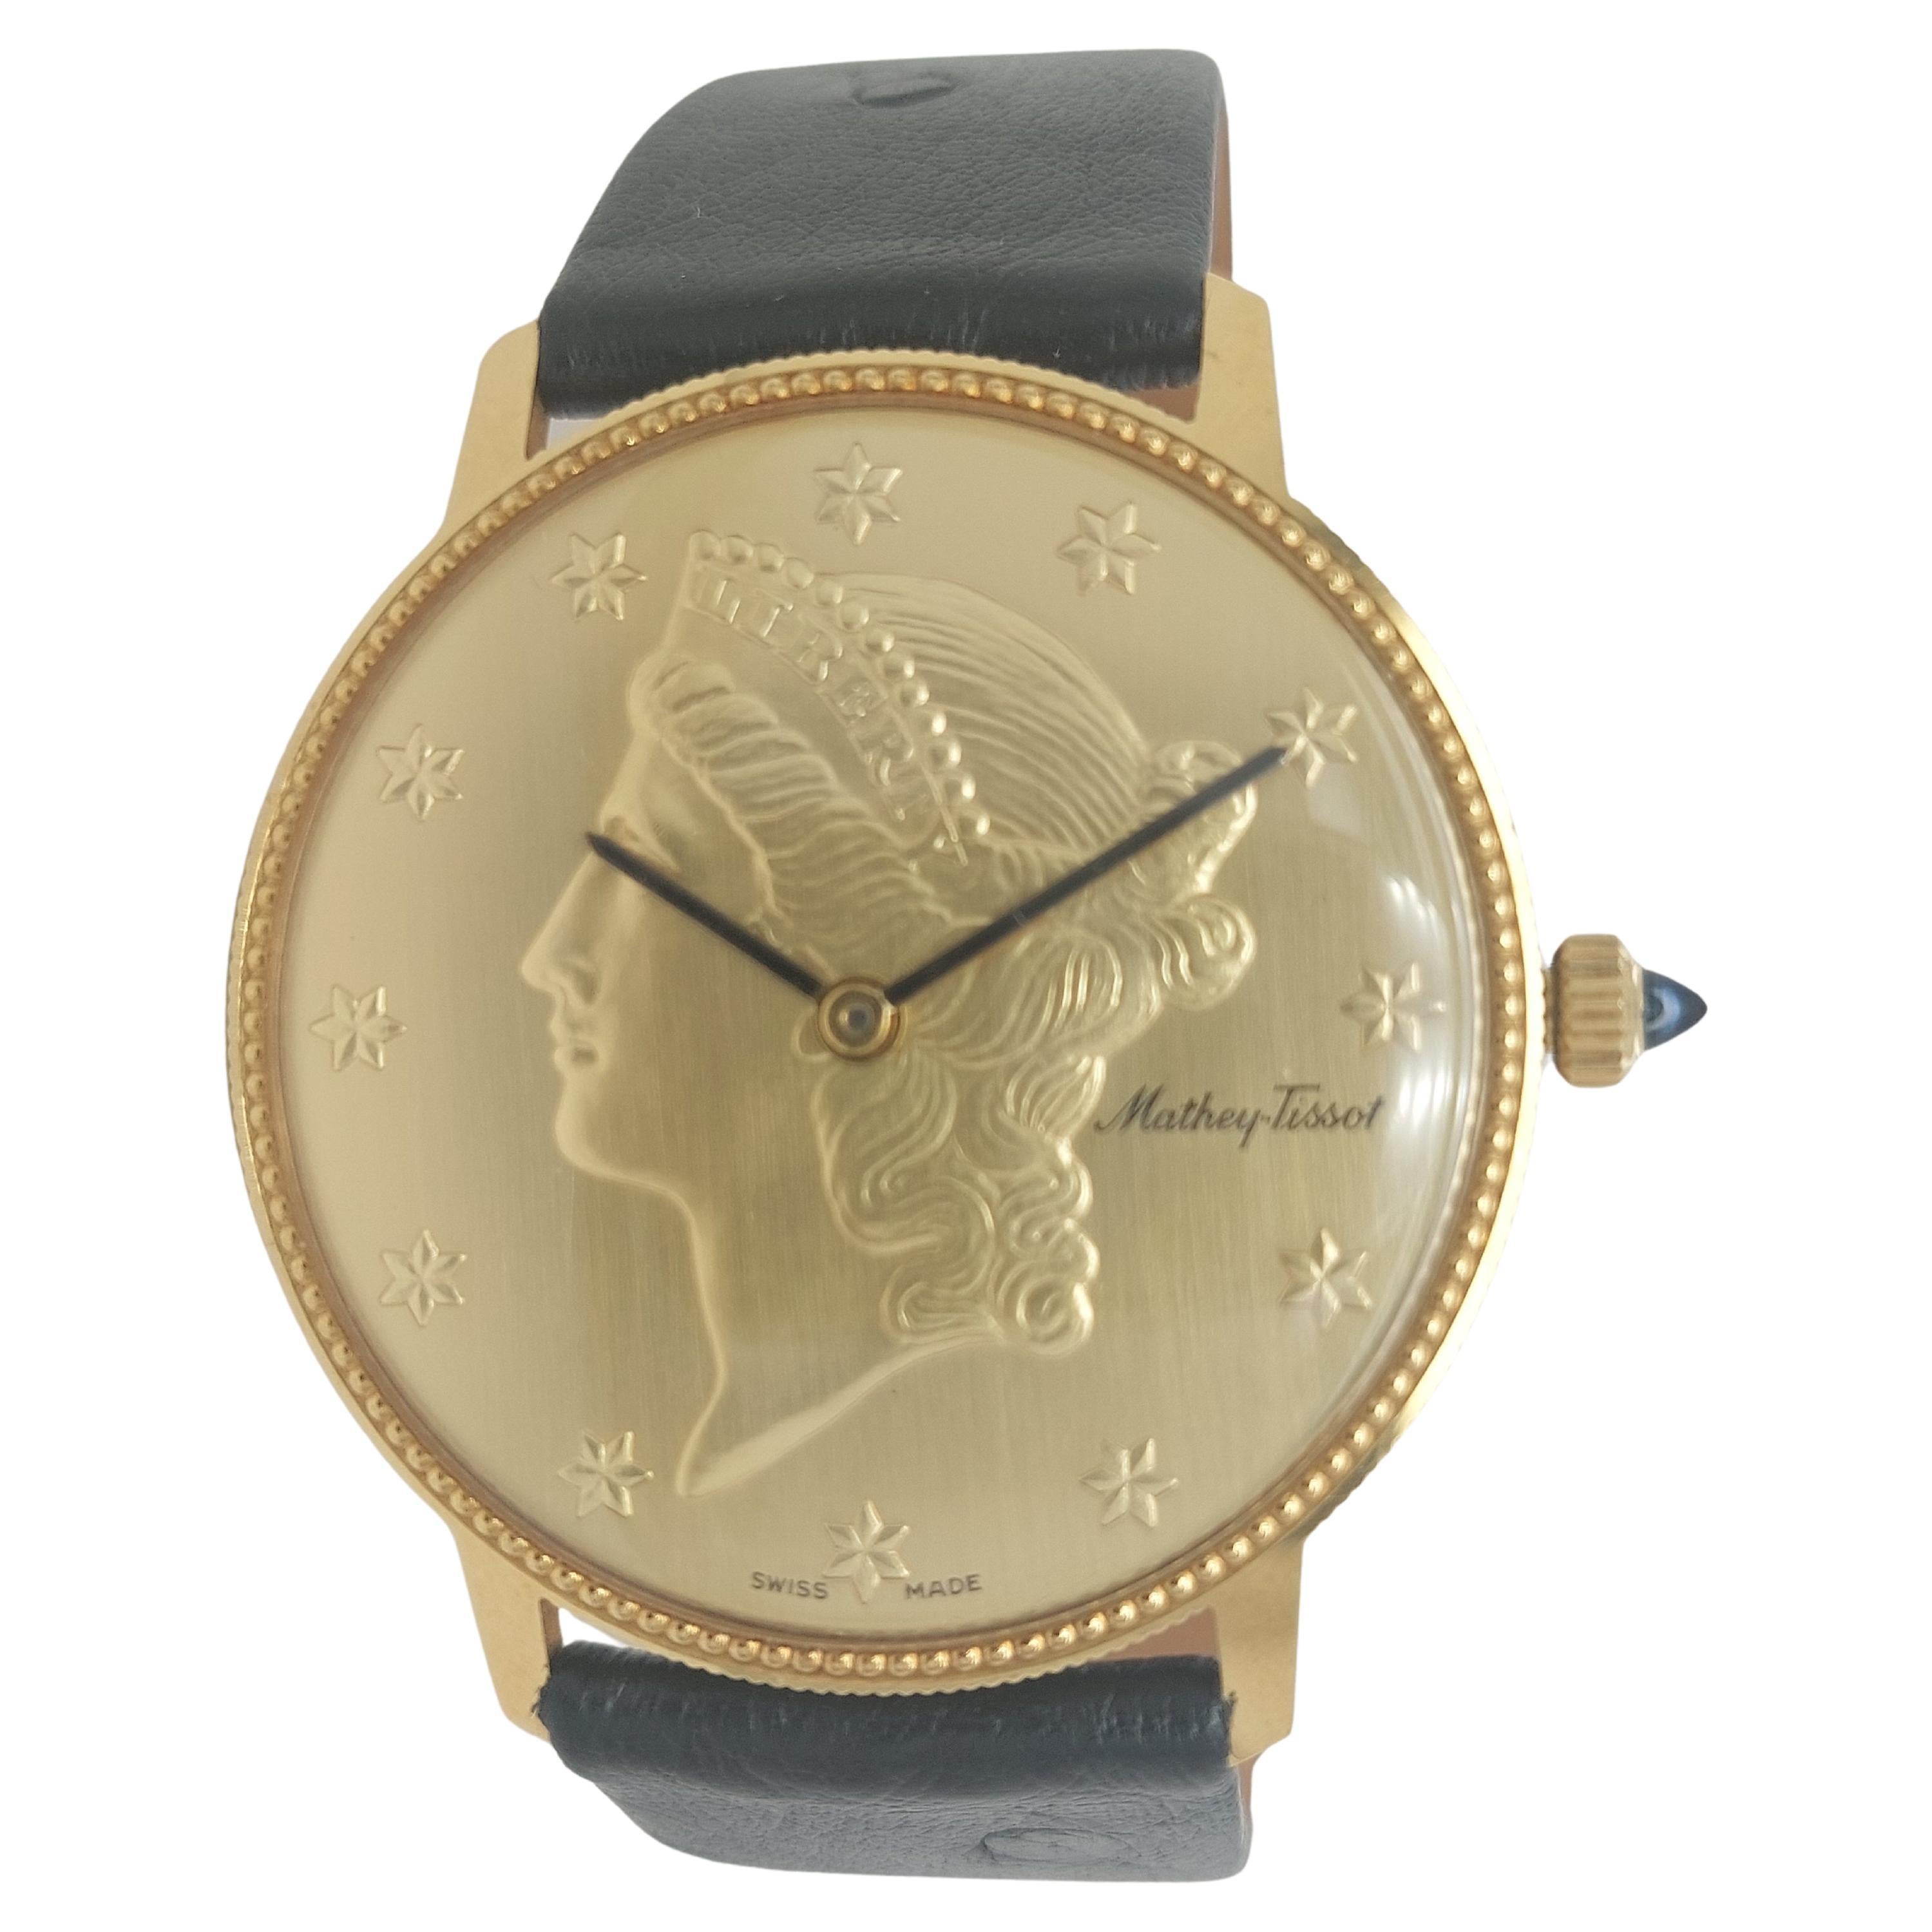 Mathey Tissot 18 kt Gold Liberty Coin Watch, Mechanical Movement, With Box

Functions: Hours, Minutes

Movement: Mechanical Movement, Hand winding

Dial: Gold dial with stars as numerals and black indexes.

Case: 18kt yellow gold round case,